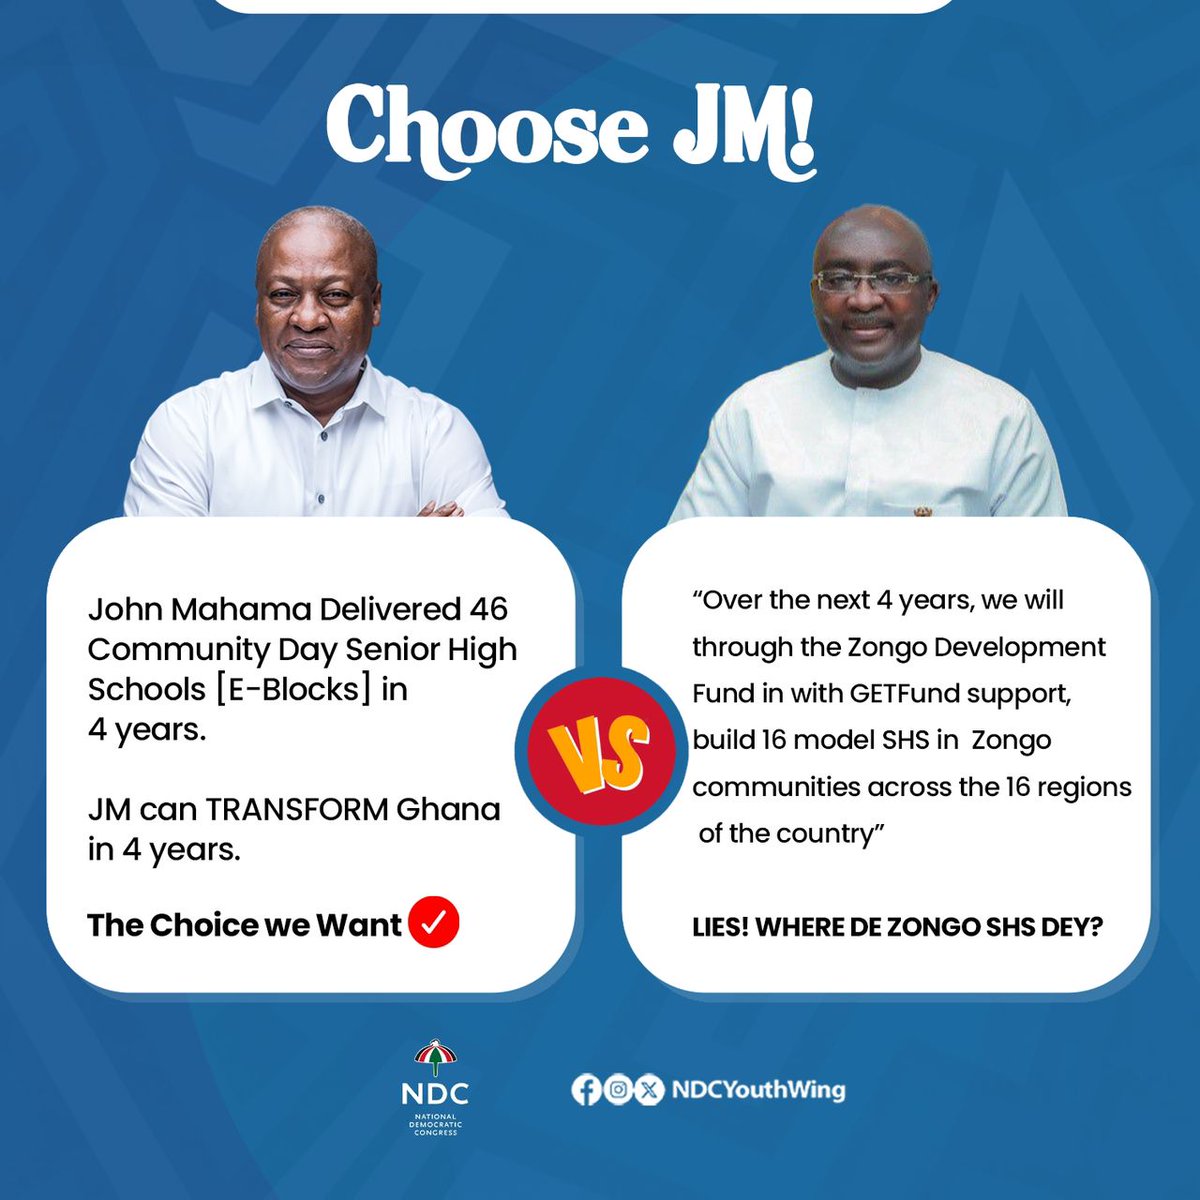 JM has always been pragmatic and effective. Facts over lies anyday. Choose JM #ChangeIsComing